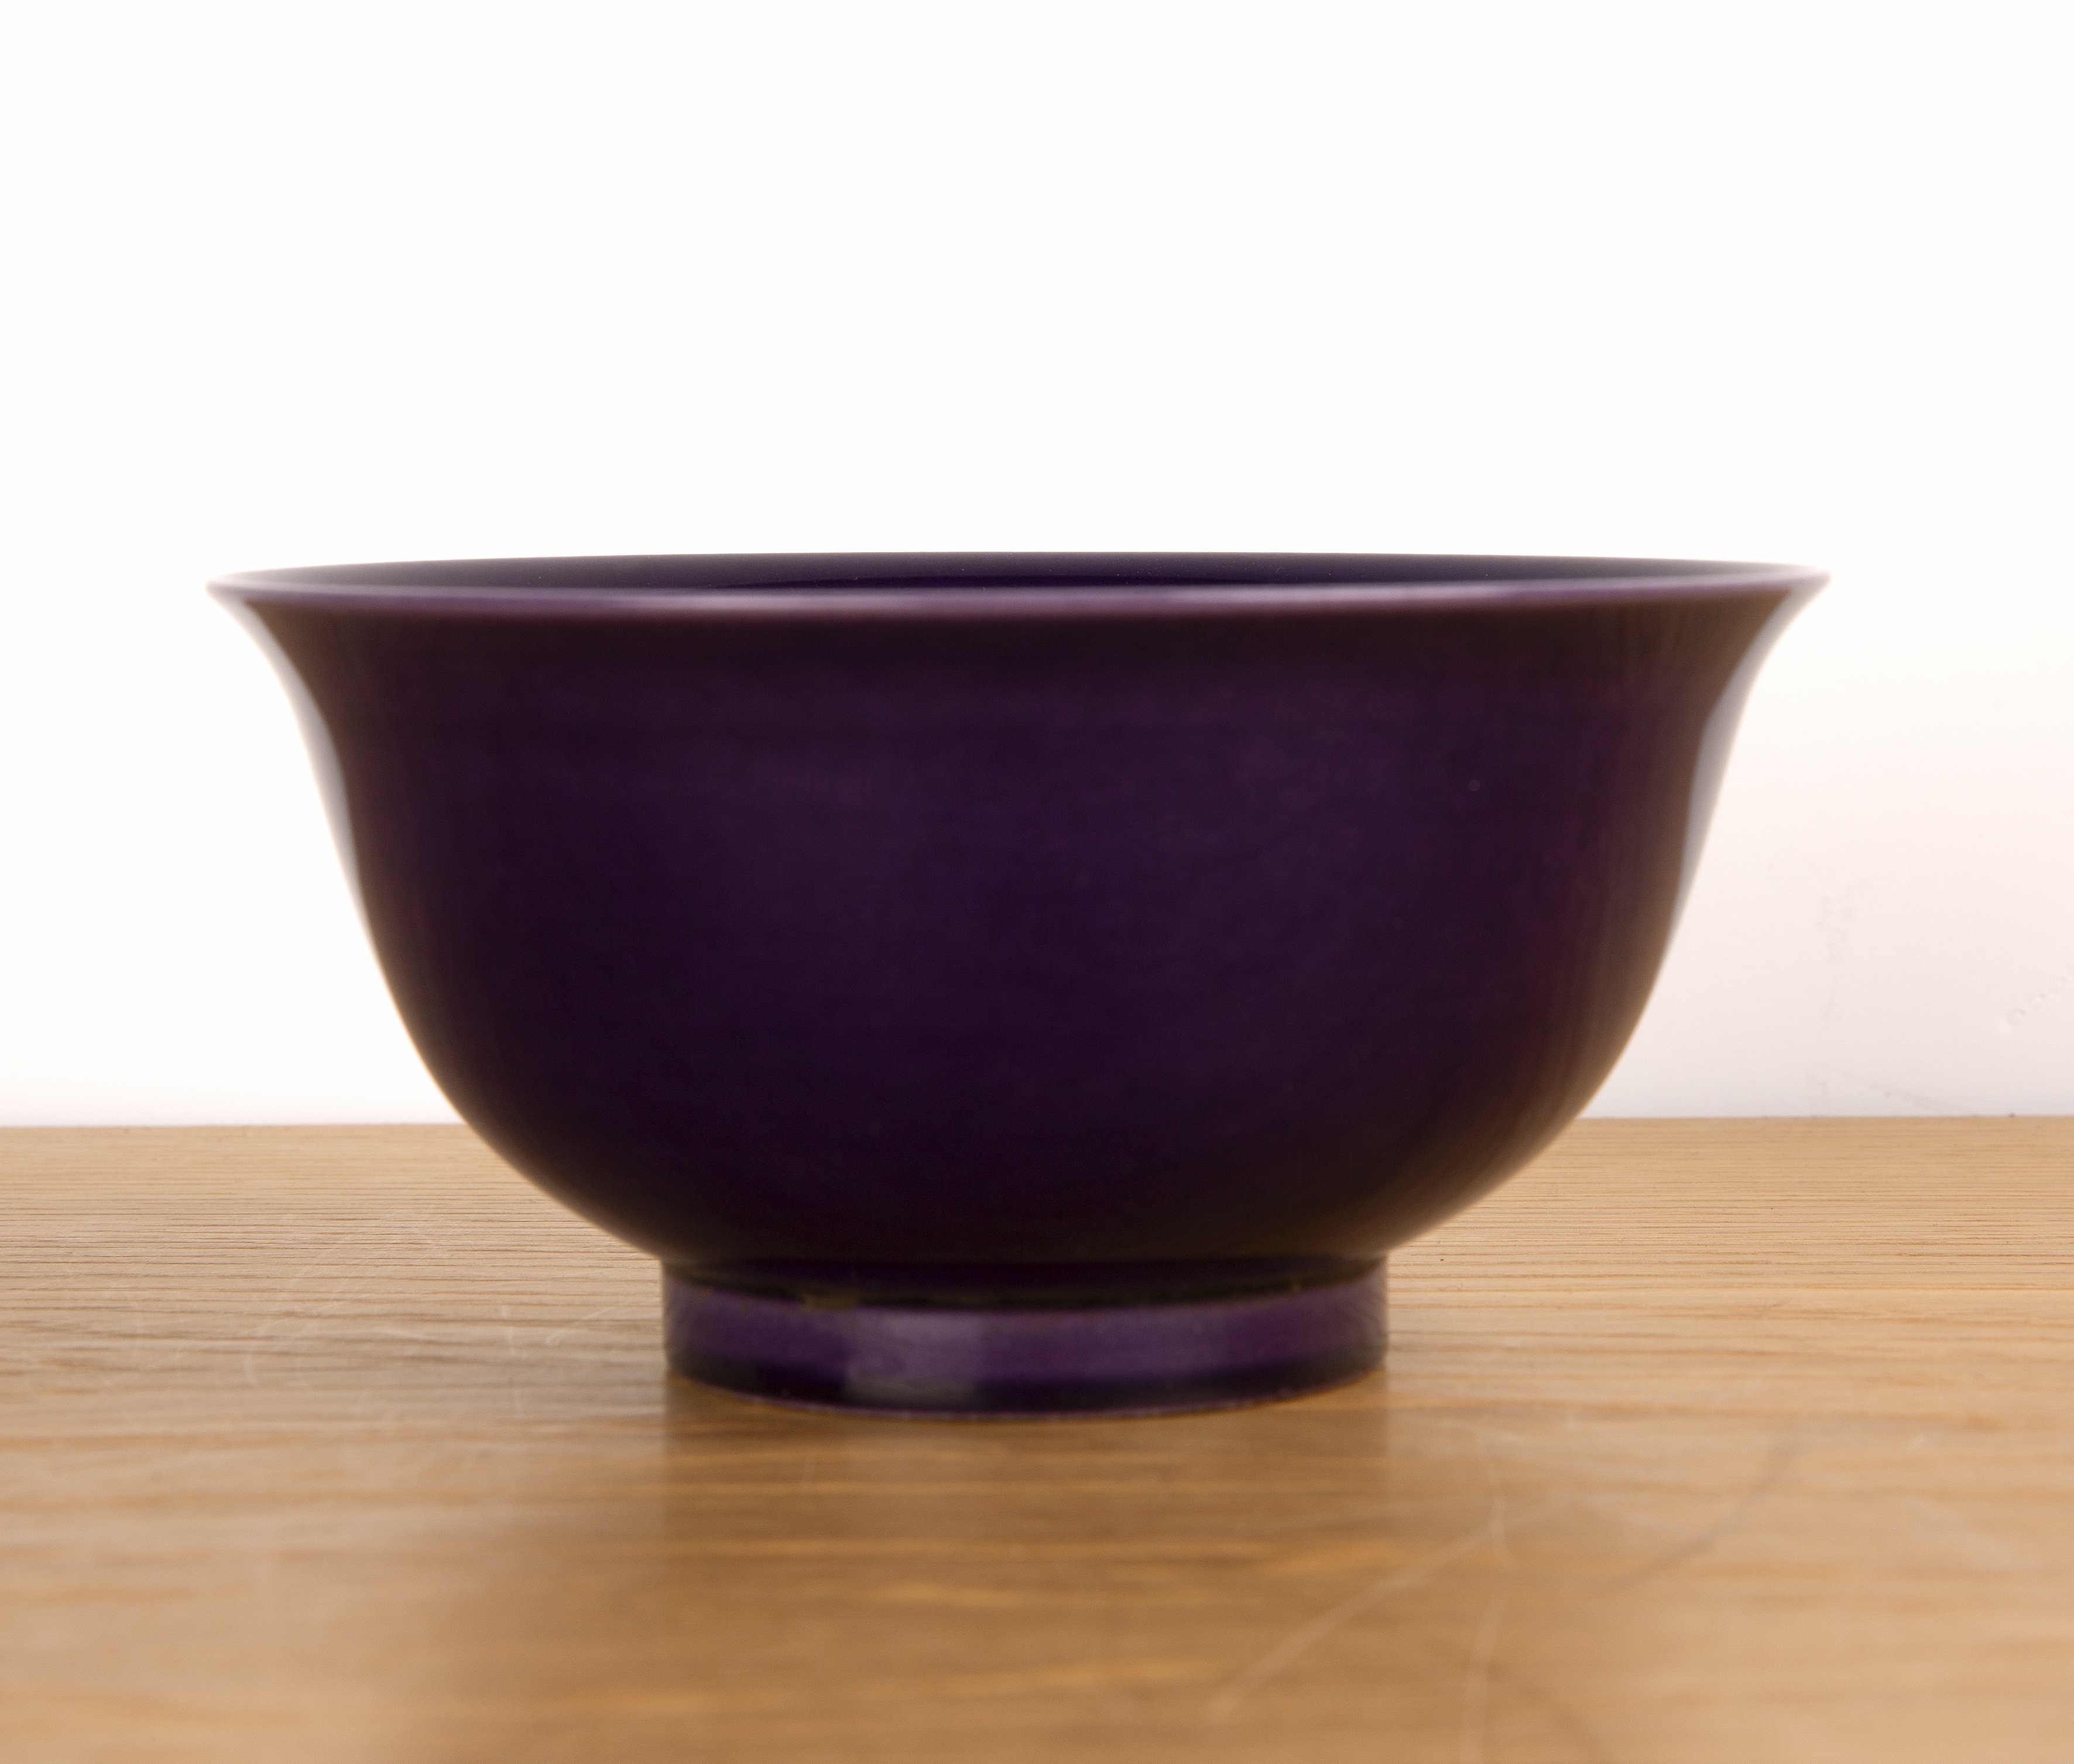 Monochrome cabbage glazed bowl Chinese of plain form, having an unglazed base and with a - Image 2 of 4